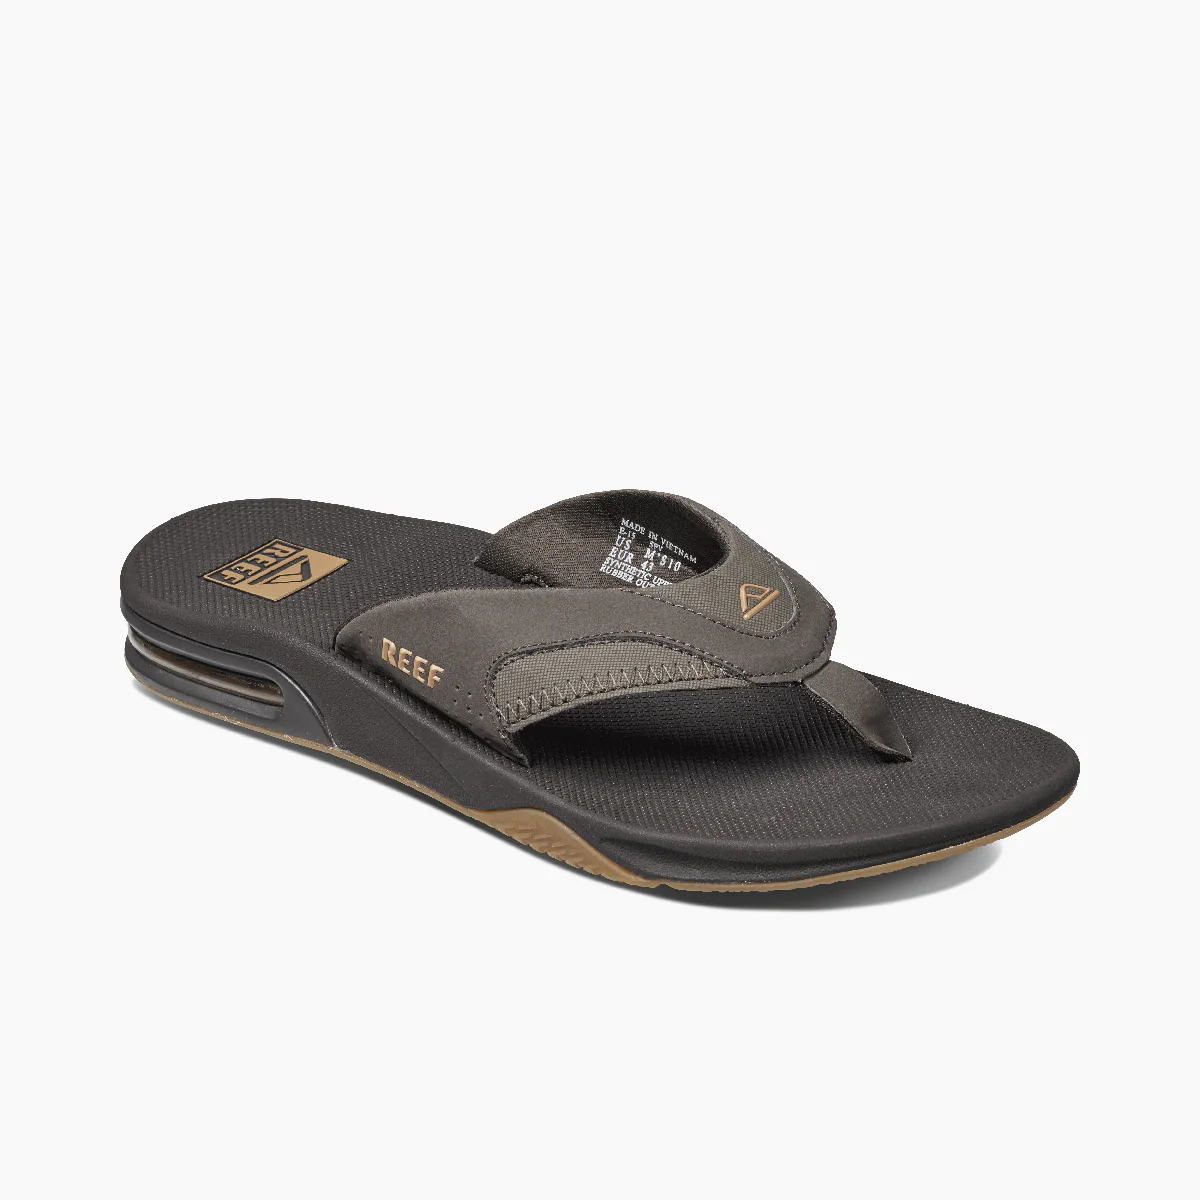 Mens Fanning flip flops in all black angle view